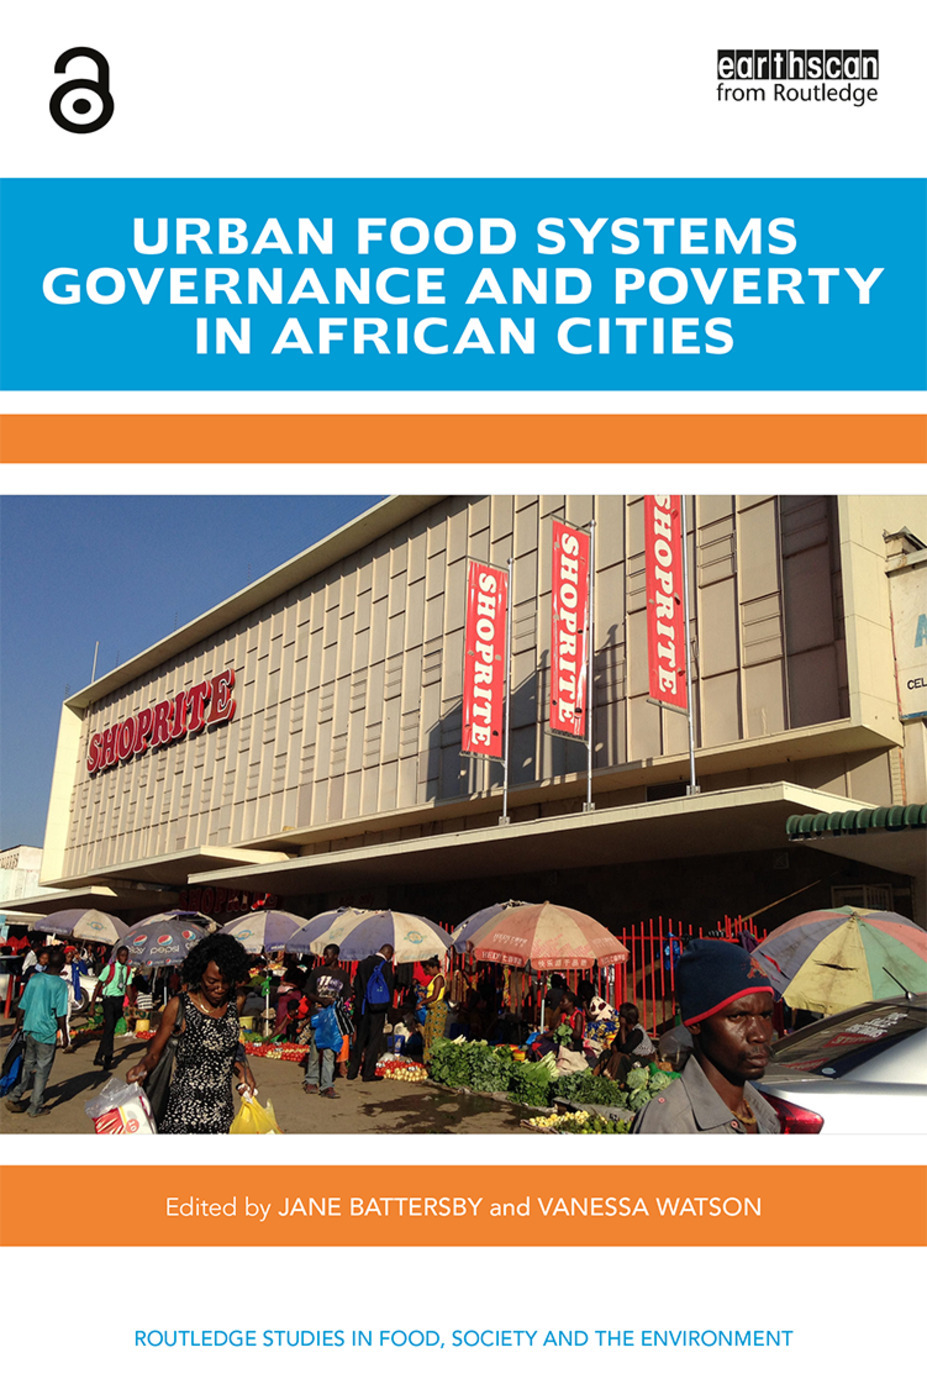 Jane Battersby and Vanessa Watson (eds.) Urban Food Systems Governance and Poverty in African Cities. London: Routledge.